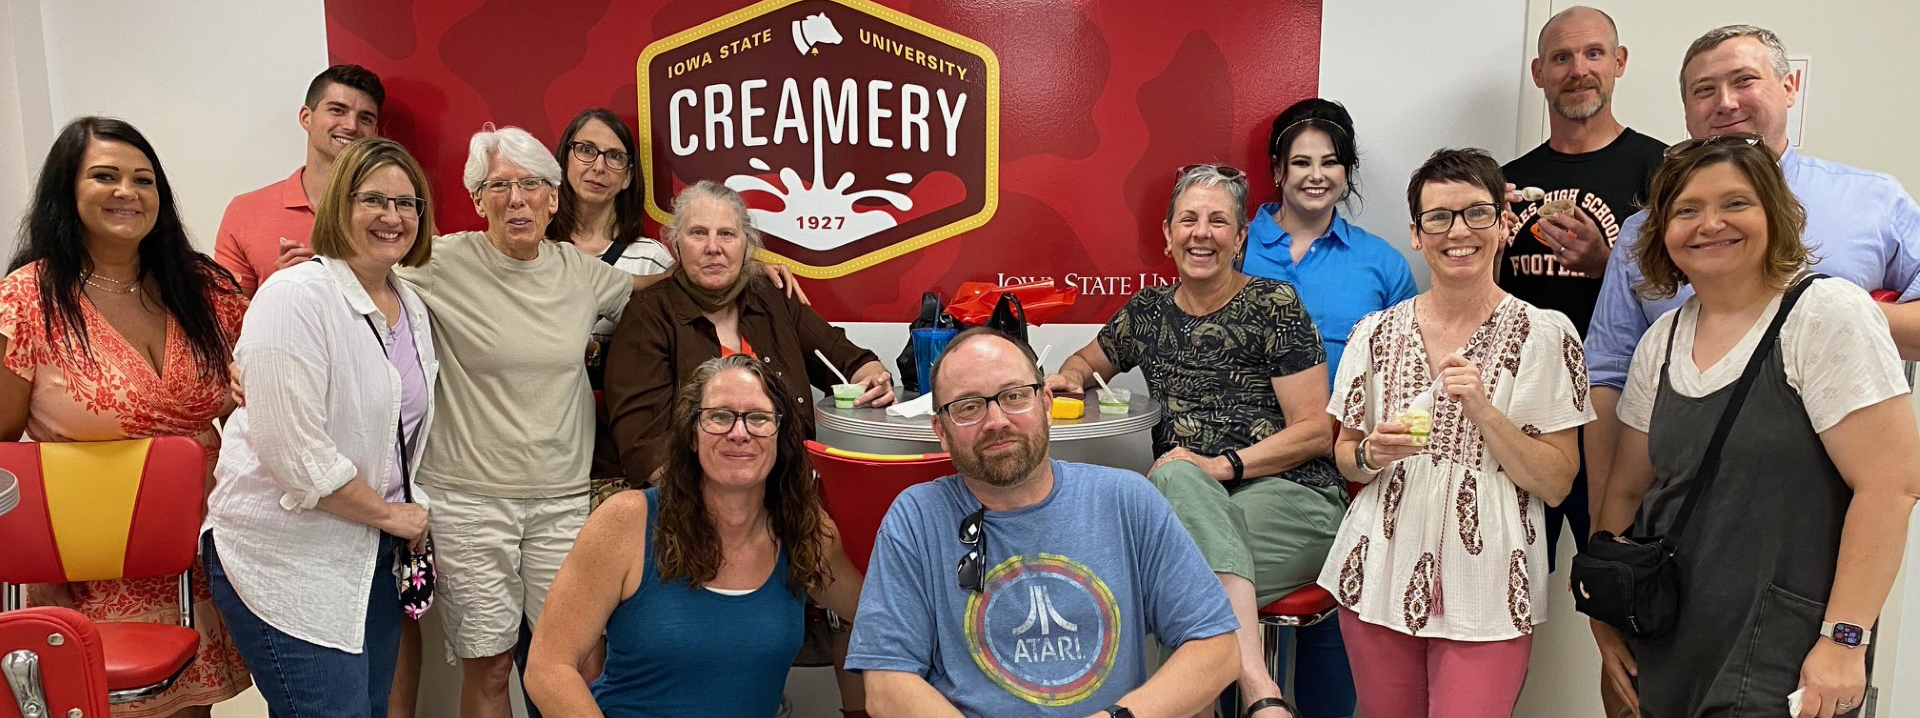 The FY24 Child Support contract team posing together at the ISU Creamery.